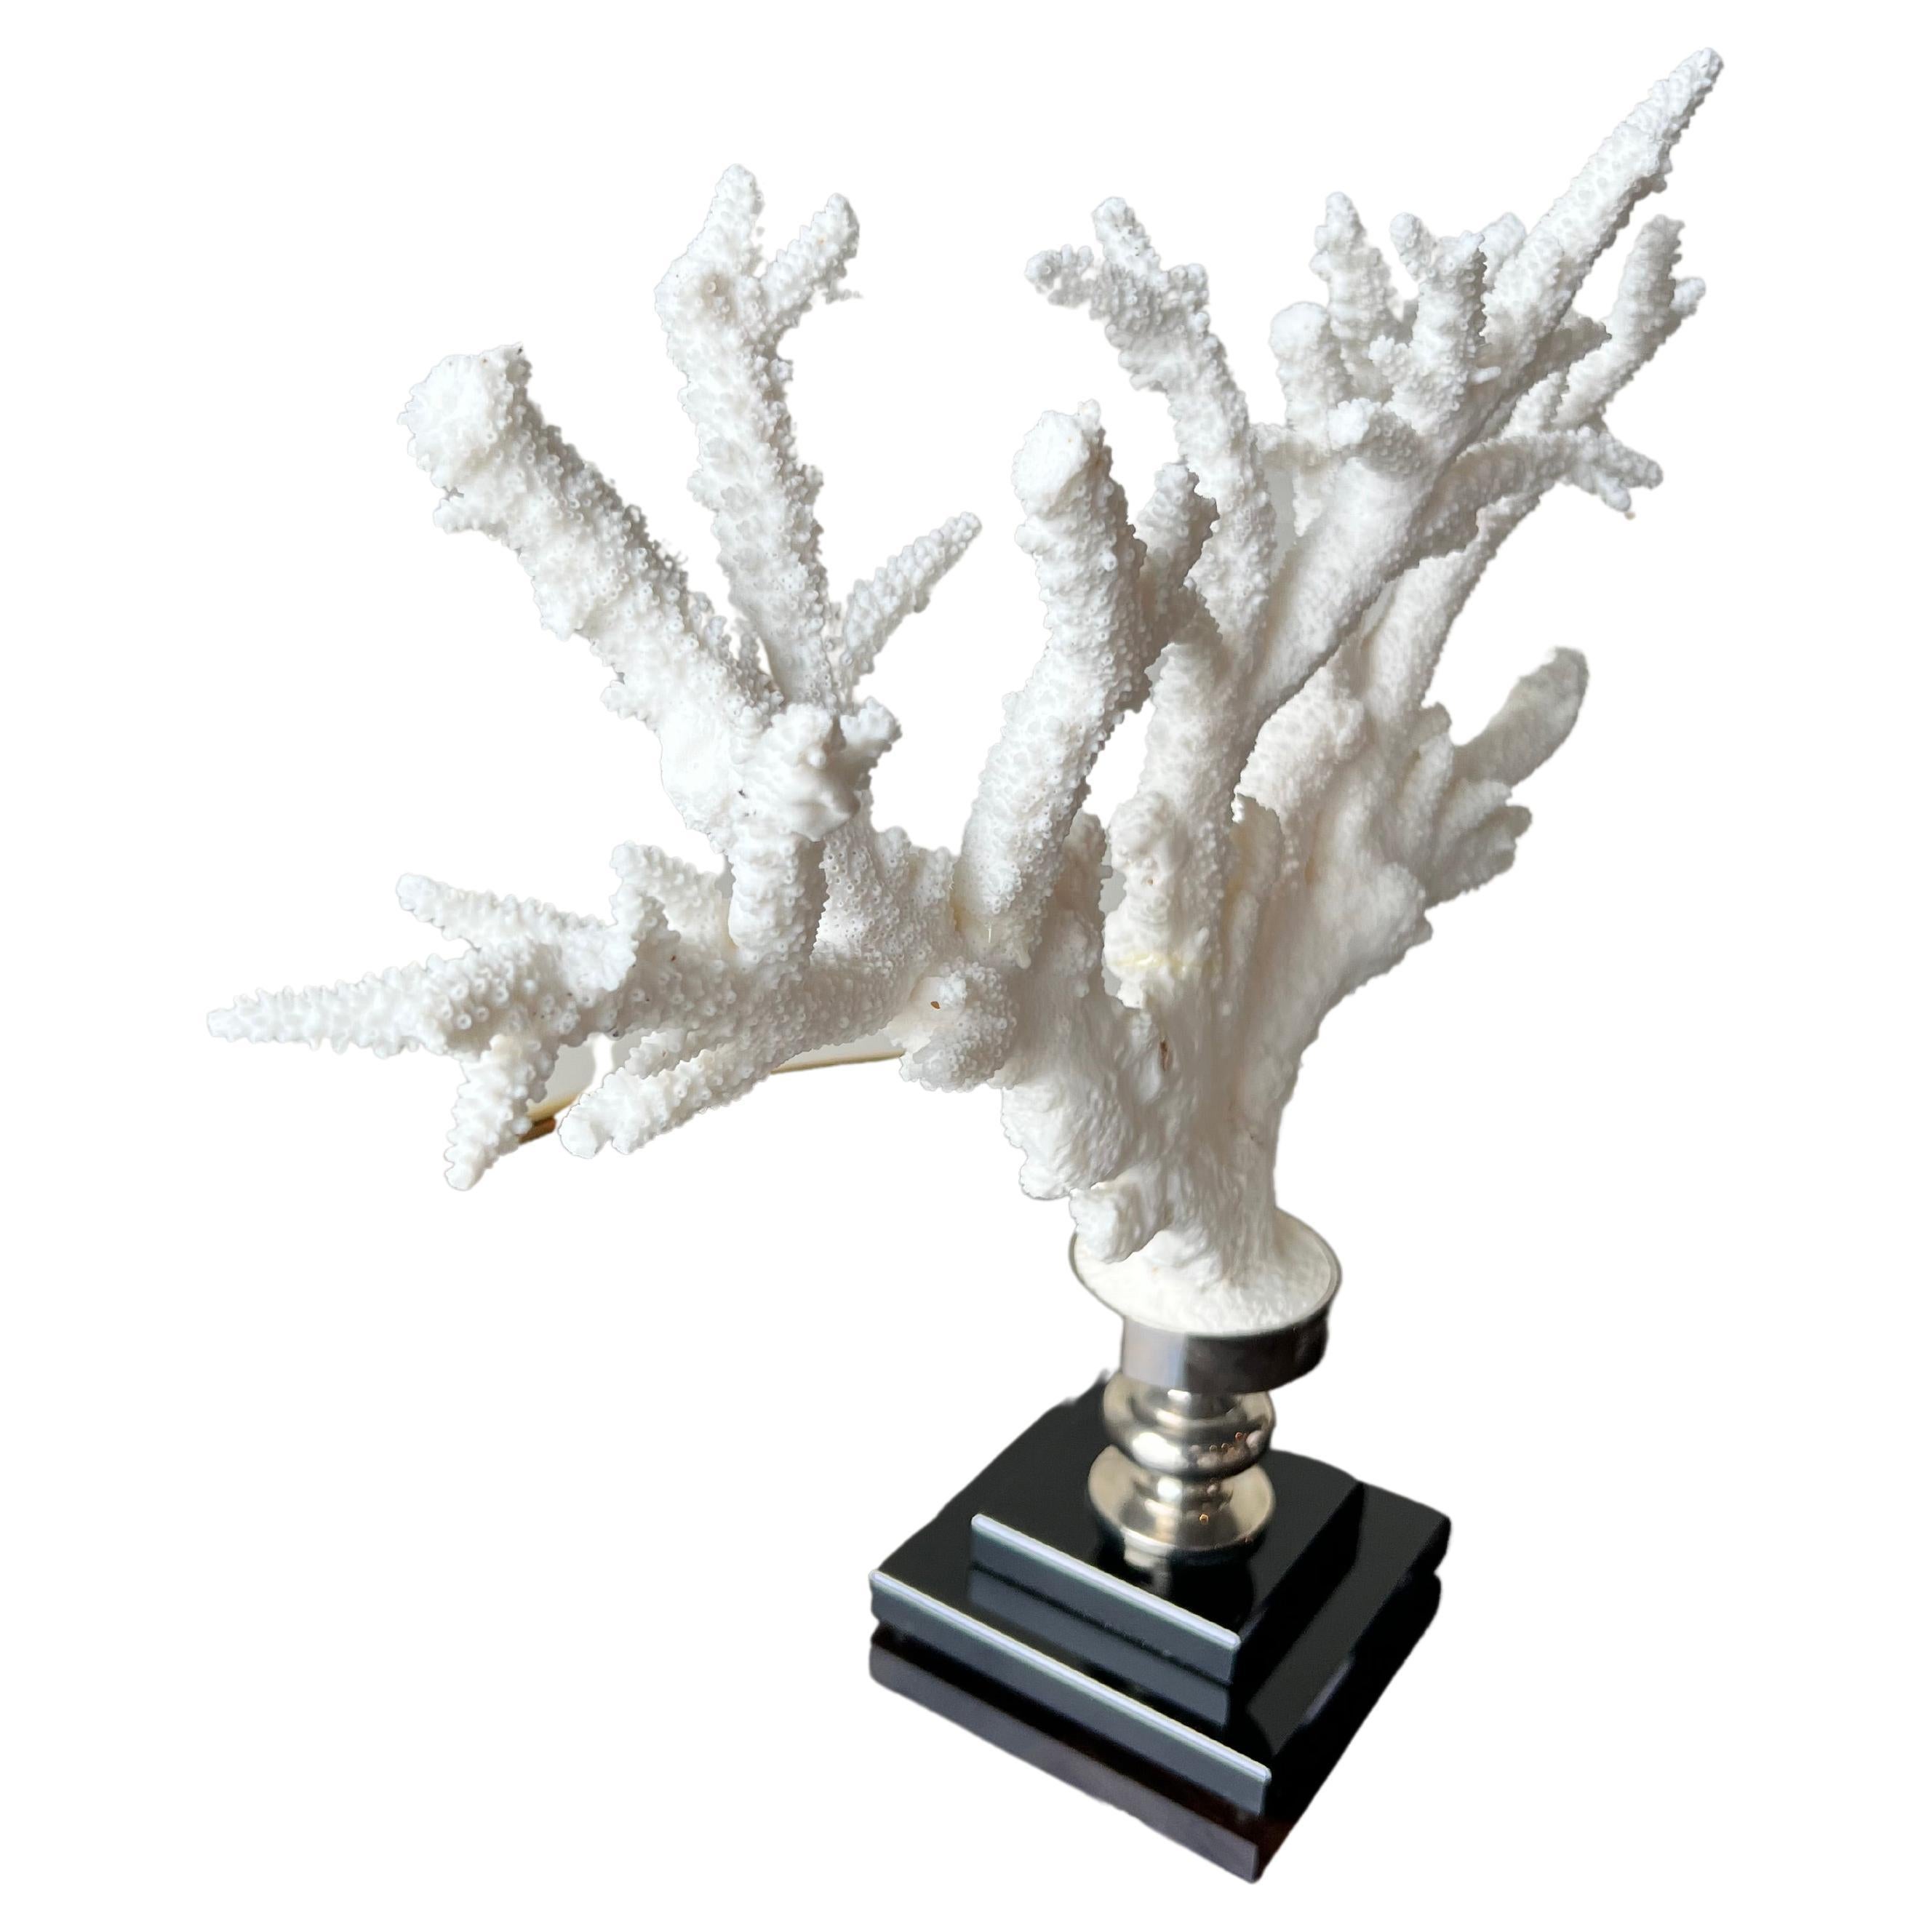 This gorgeous nickel mounted specimen of branch coral has a black glass base.